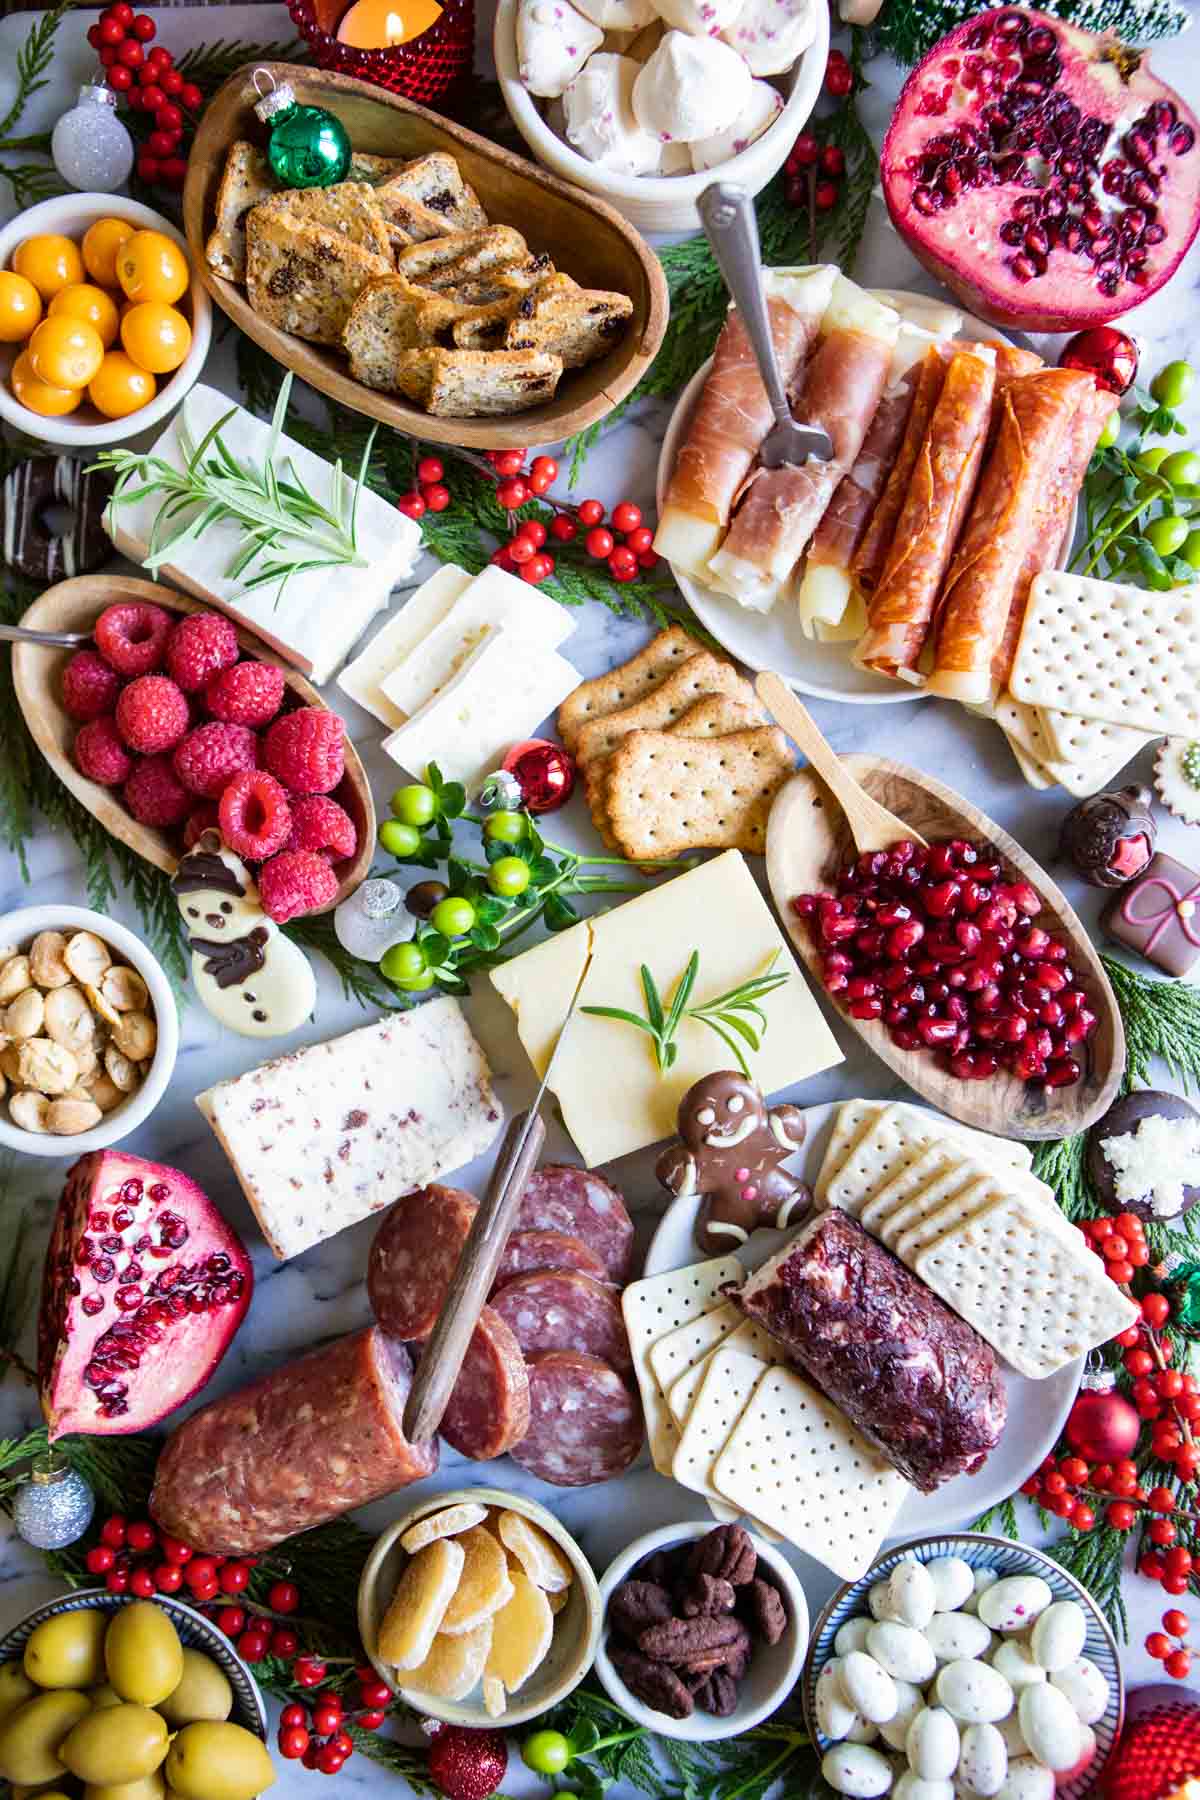 cheese, cured meats, nuts, fruit and seasonal sweets on a marble board for a holiday party